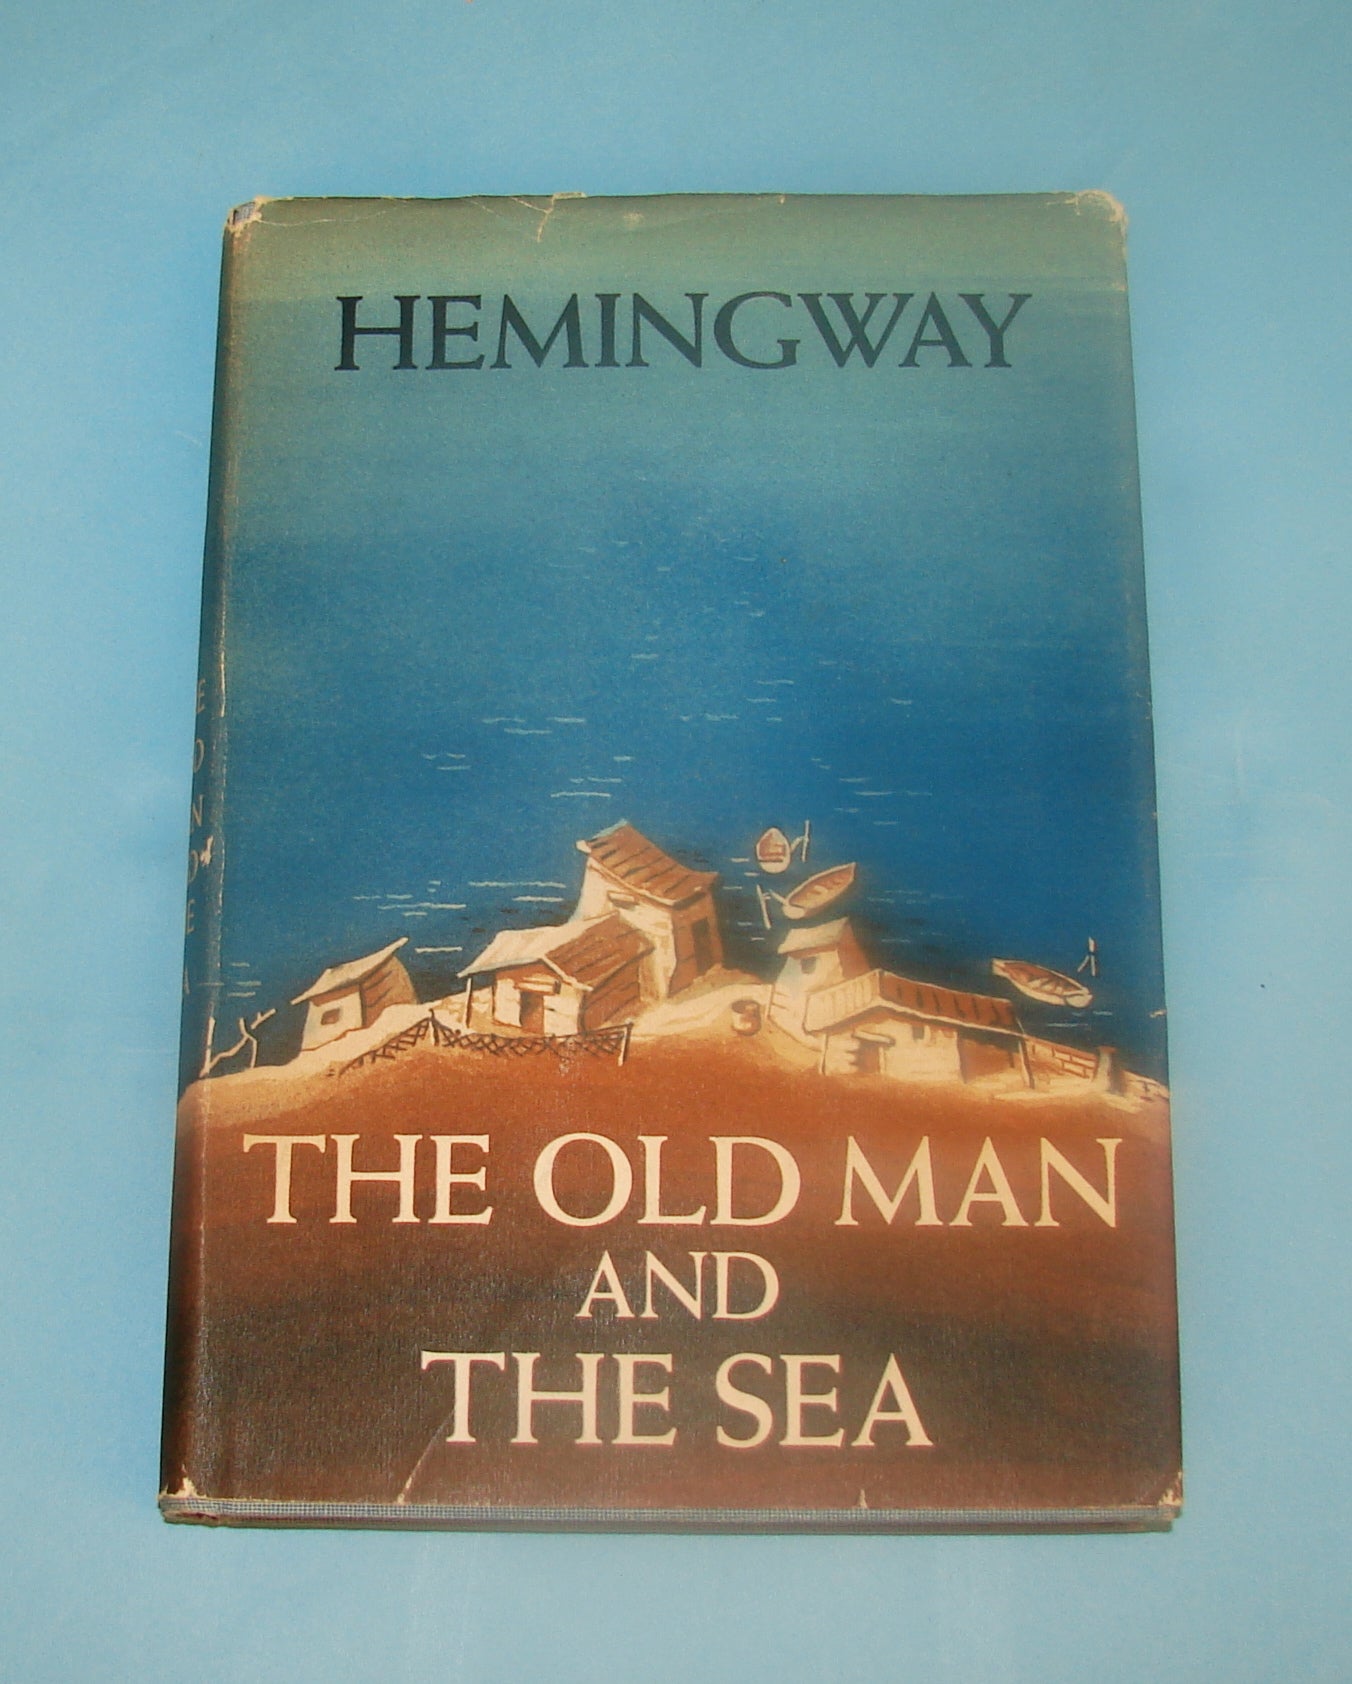 First Edition Hemingway's Book "The Old Man and the Sea"